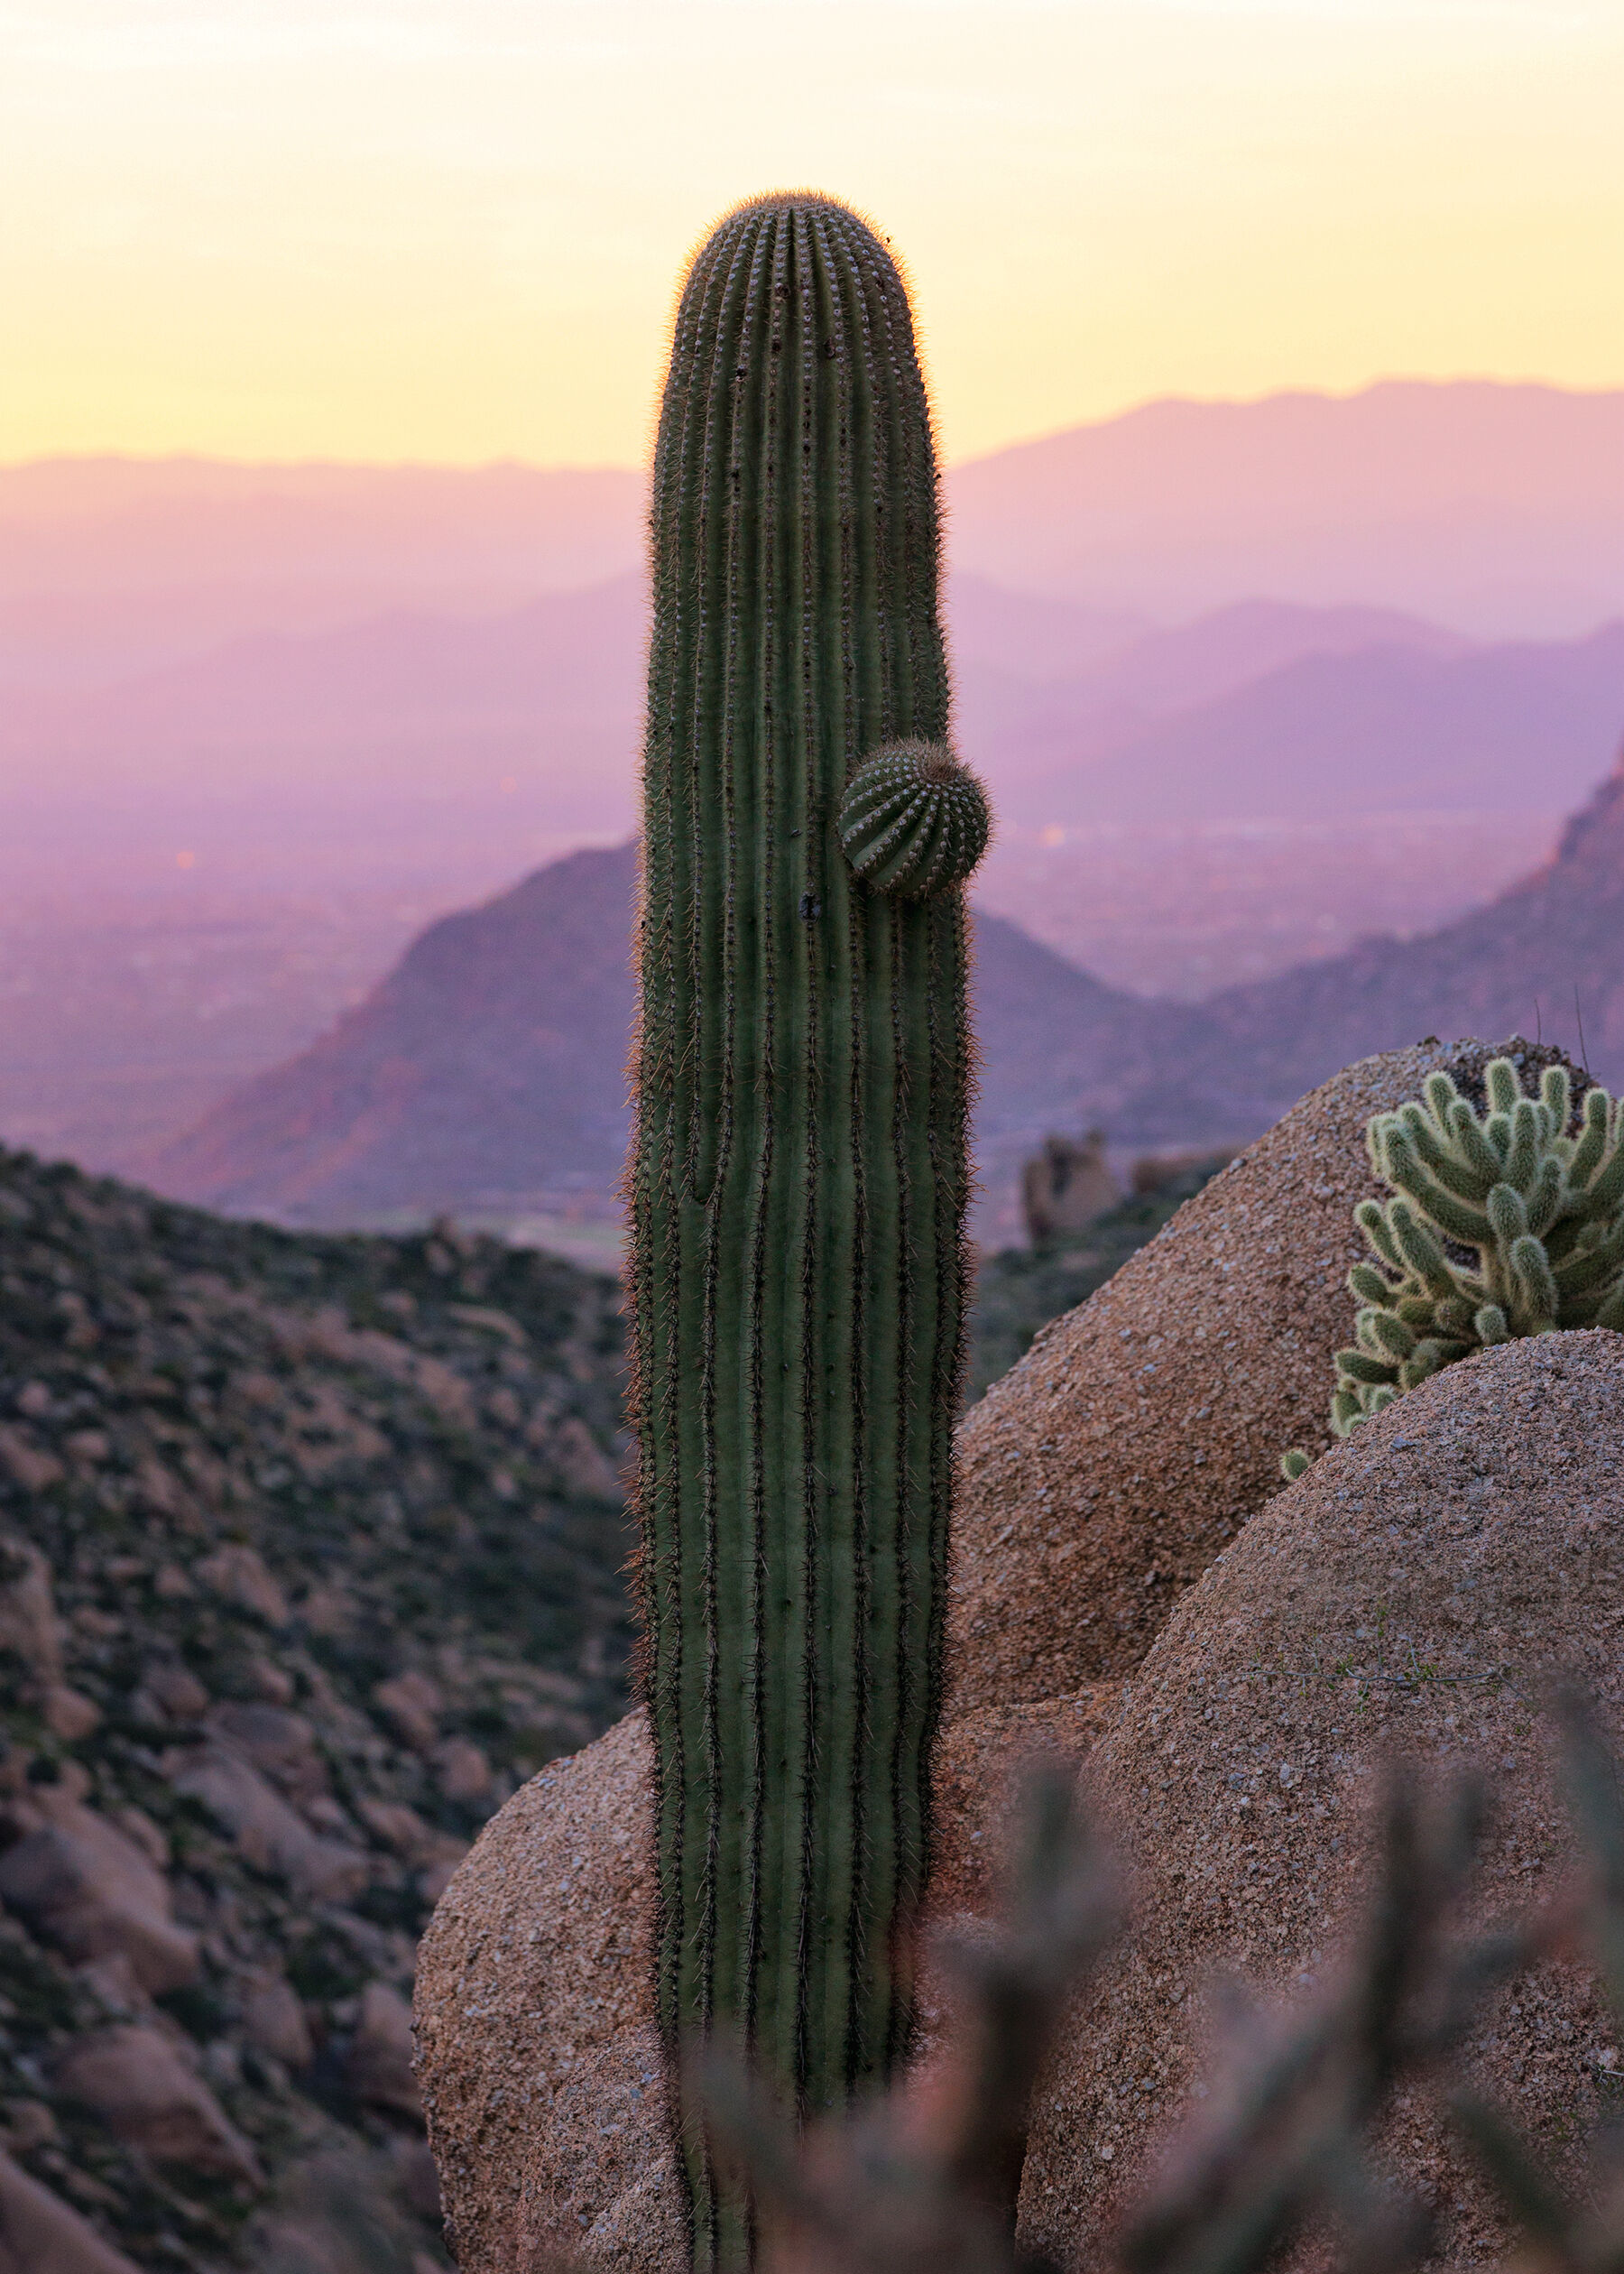 Saguaro Cactus at Tom's Thumb, Arizona with sunset-washed mountains in the background